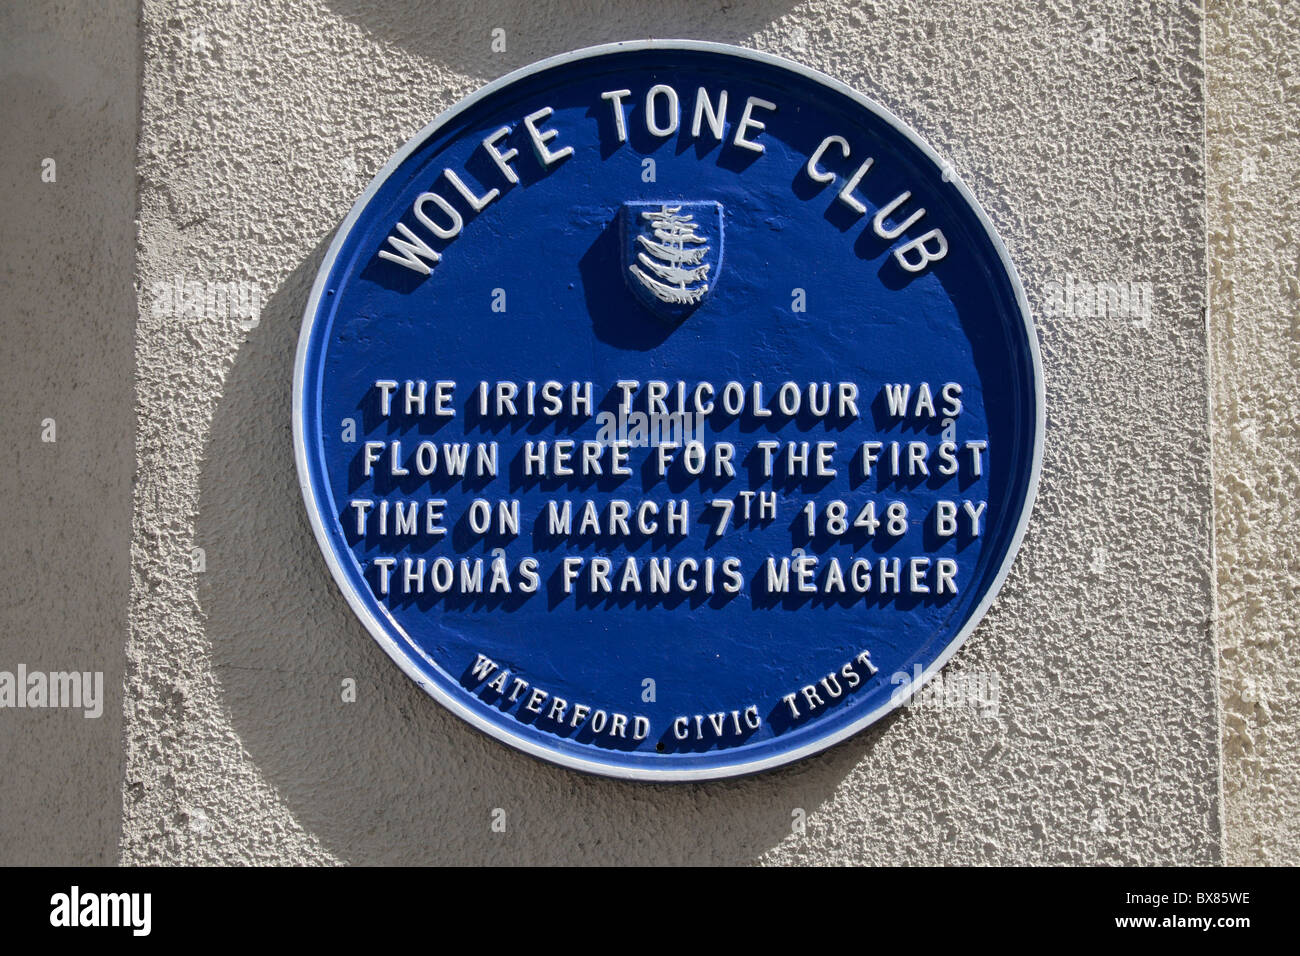 Two plaques commemorating the first flying of the Irish Tricolour in 1848 by Thomas Francis Meagher, Waterford, Ireland. Stock Photo